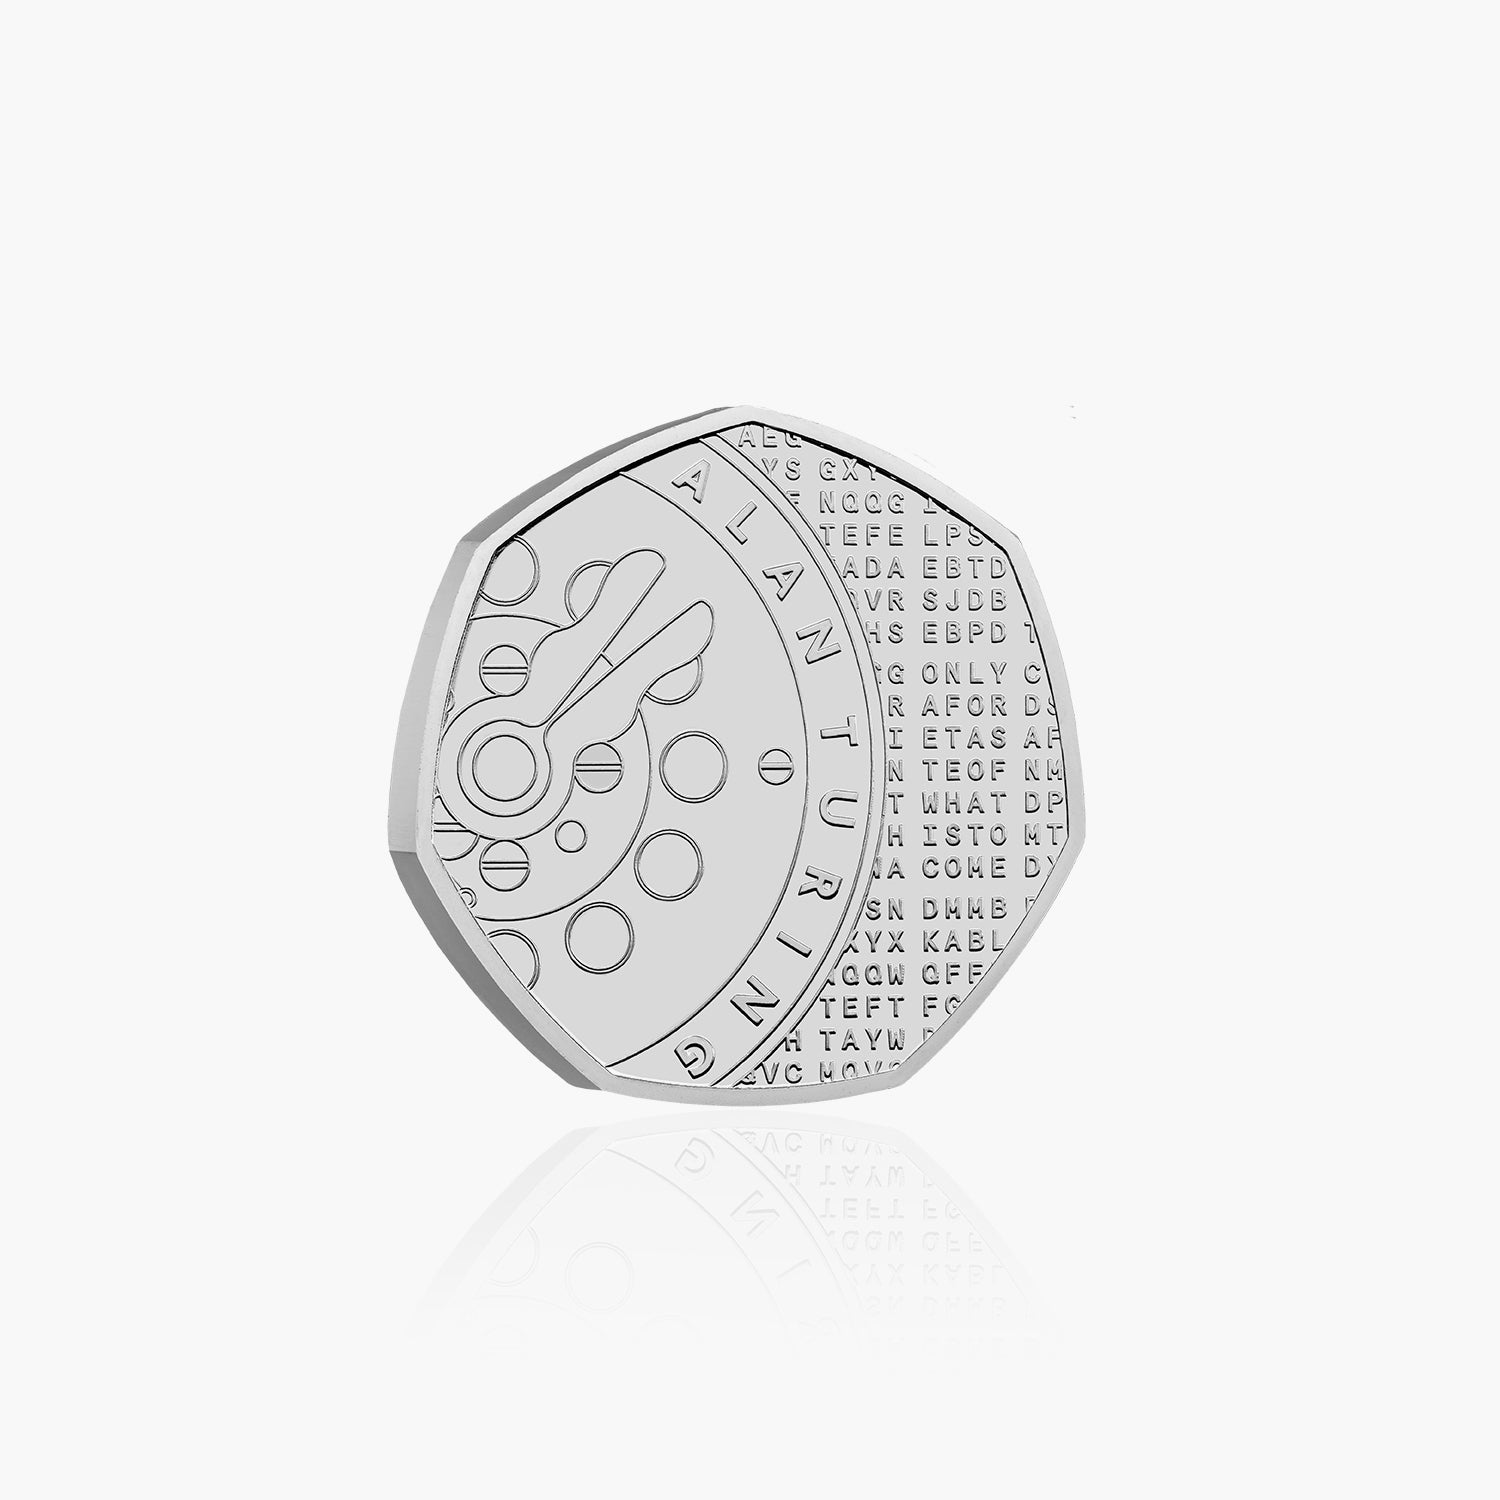 Alan Turing 2022 UK 50p Brilliant Uncirculated Coin